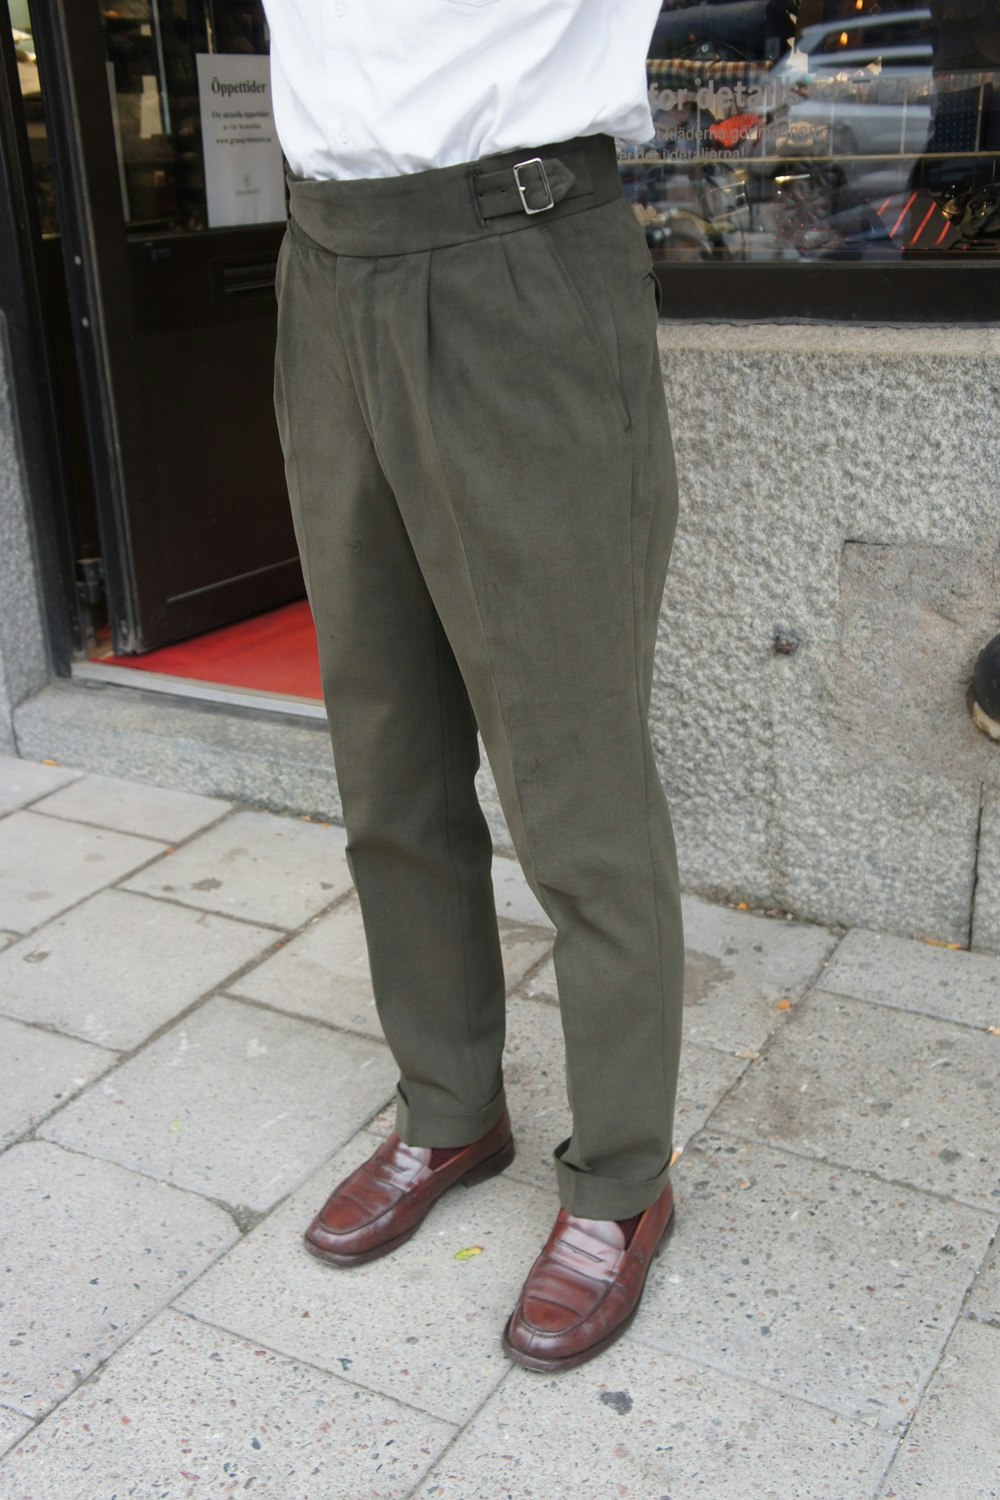 Solid Ghurka Heavy Cotton Trousers - Olive Green